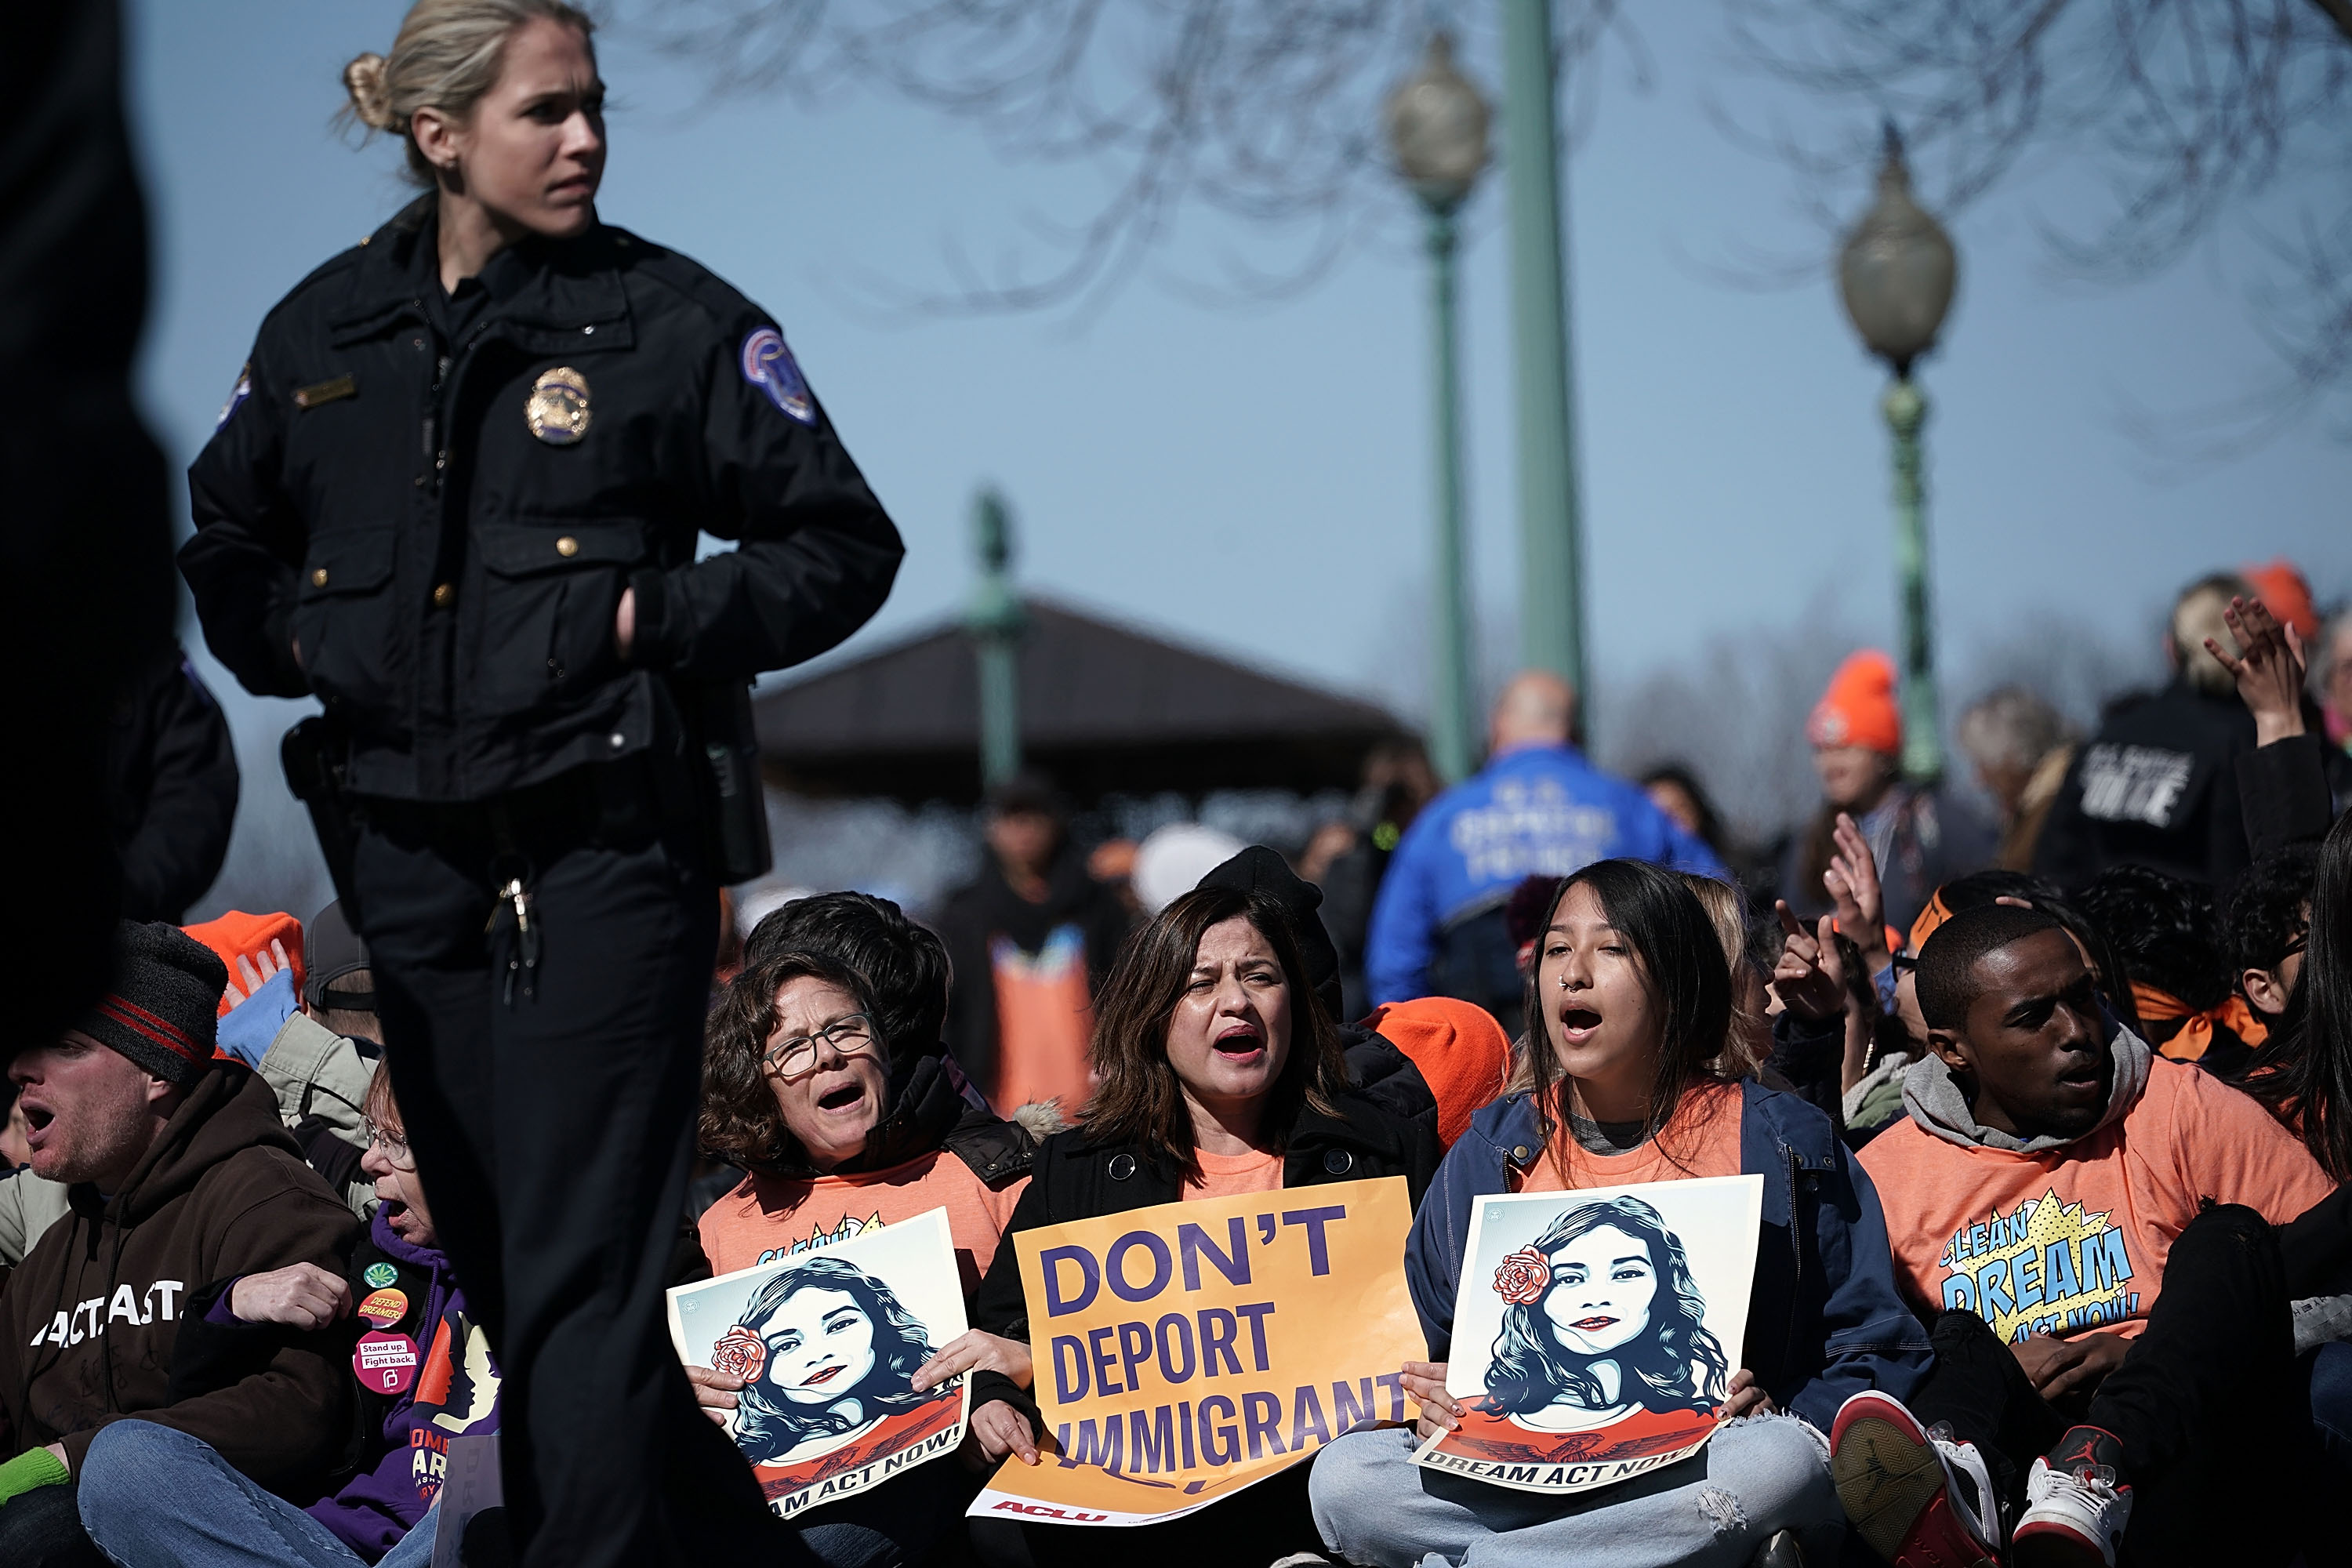 Immigration activists stage a protest on Independence Avenue in Washington, DC March 5, 2018. (Alex Wong—Getty Images)